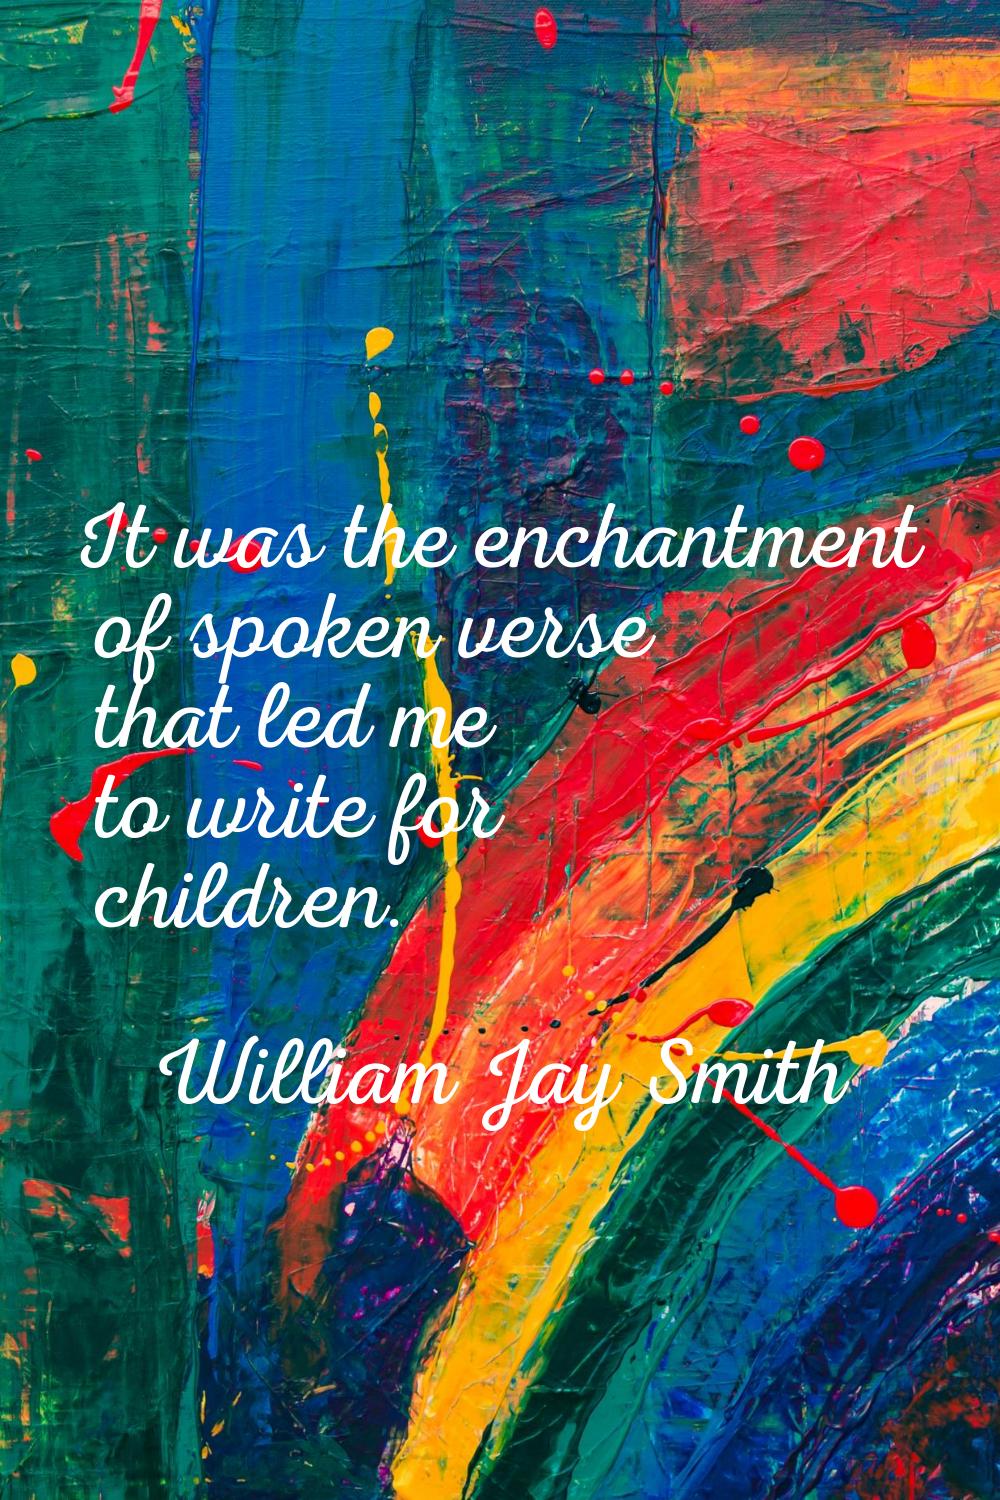 It was the enchantment of spoken verse that led me to write for children.